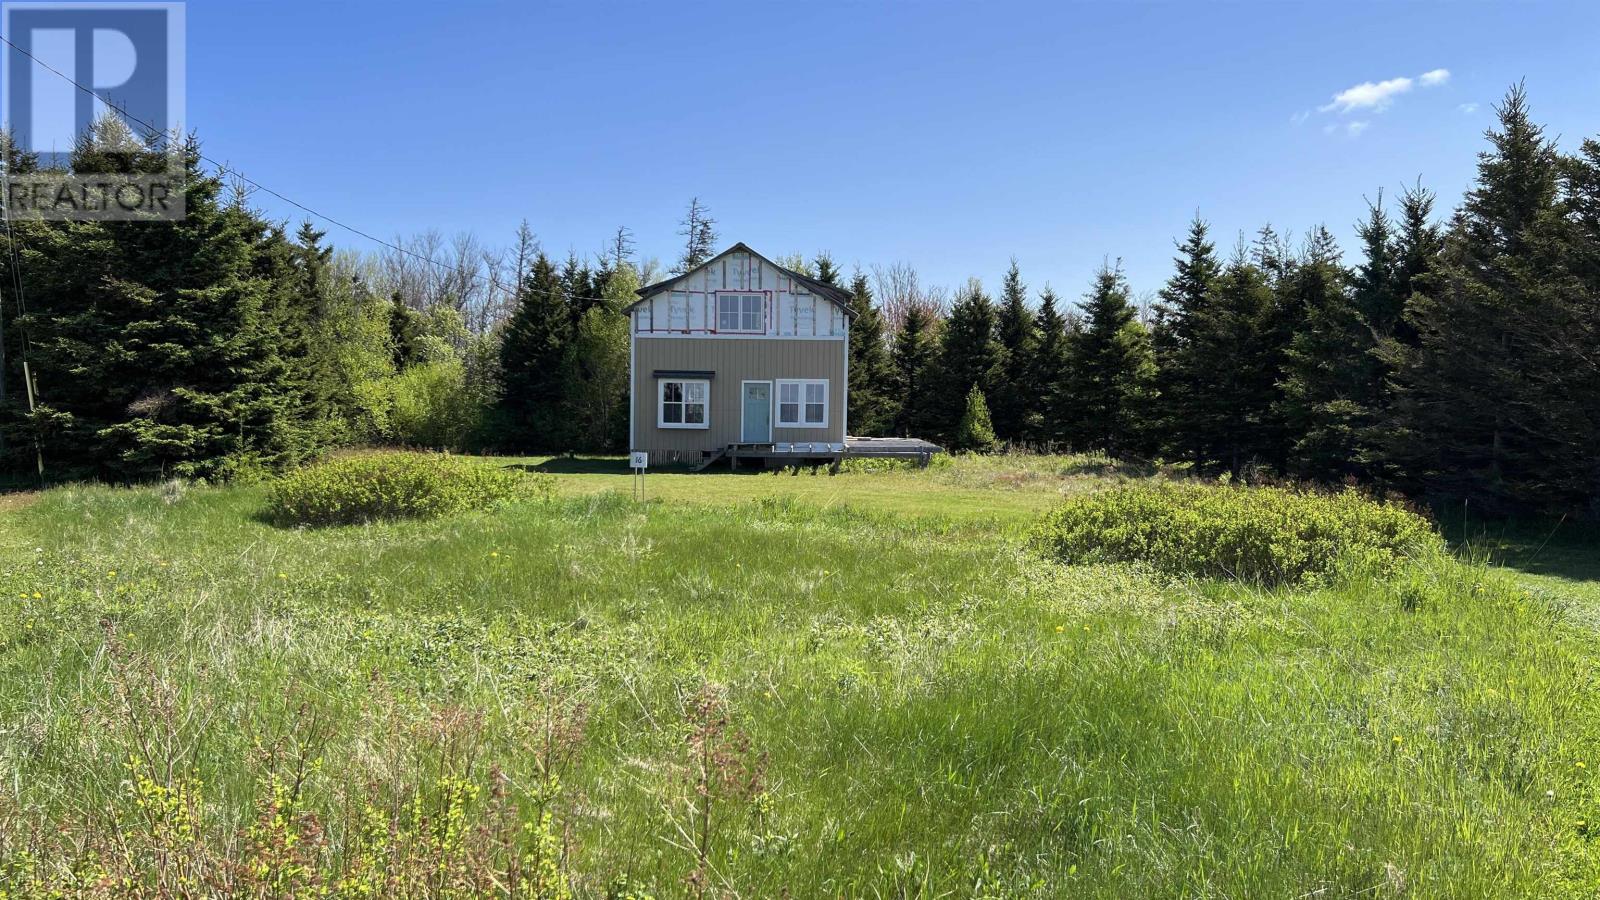 16 Sunset Court, Blooming Point, Prince Edward Island  C0A 1T0 - Photo 2 - 202413930